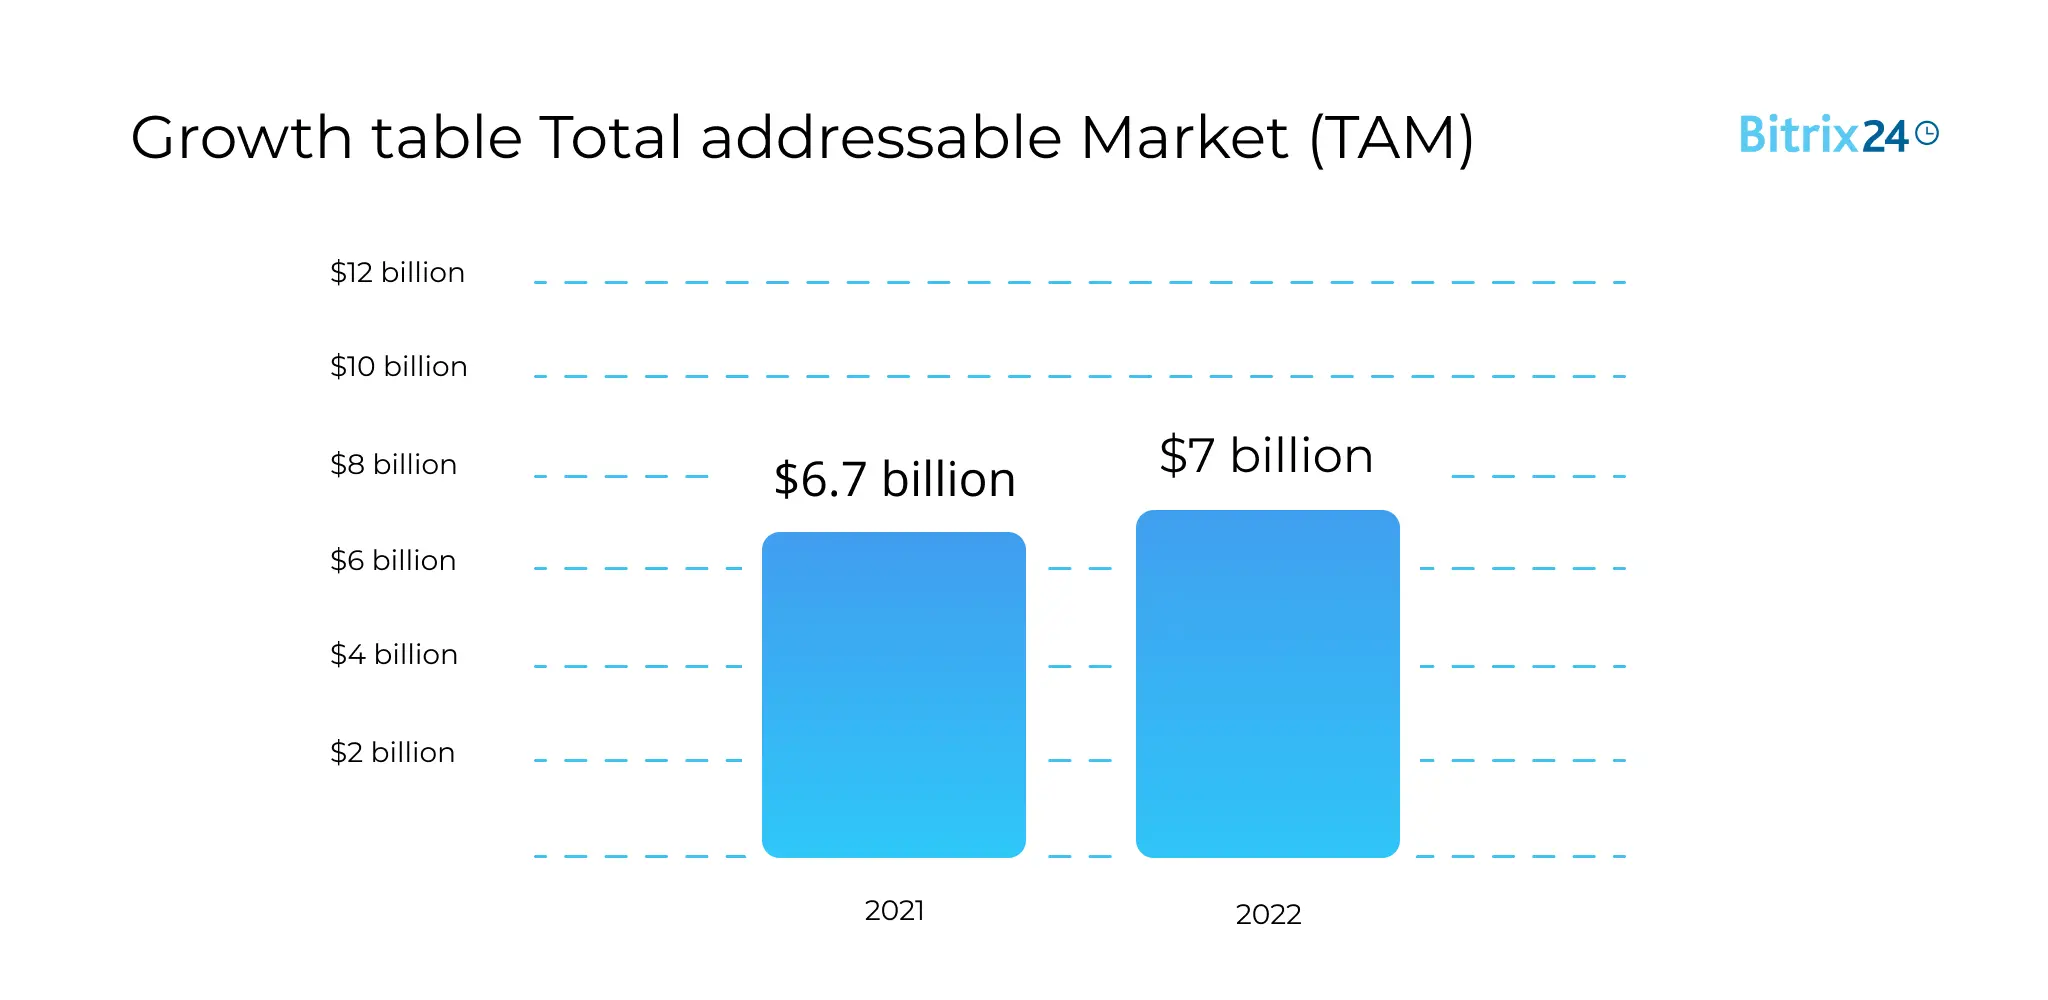 Growth table Total addressable Market (TAM)